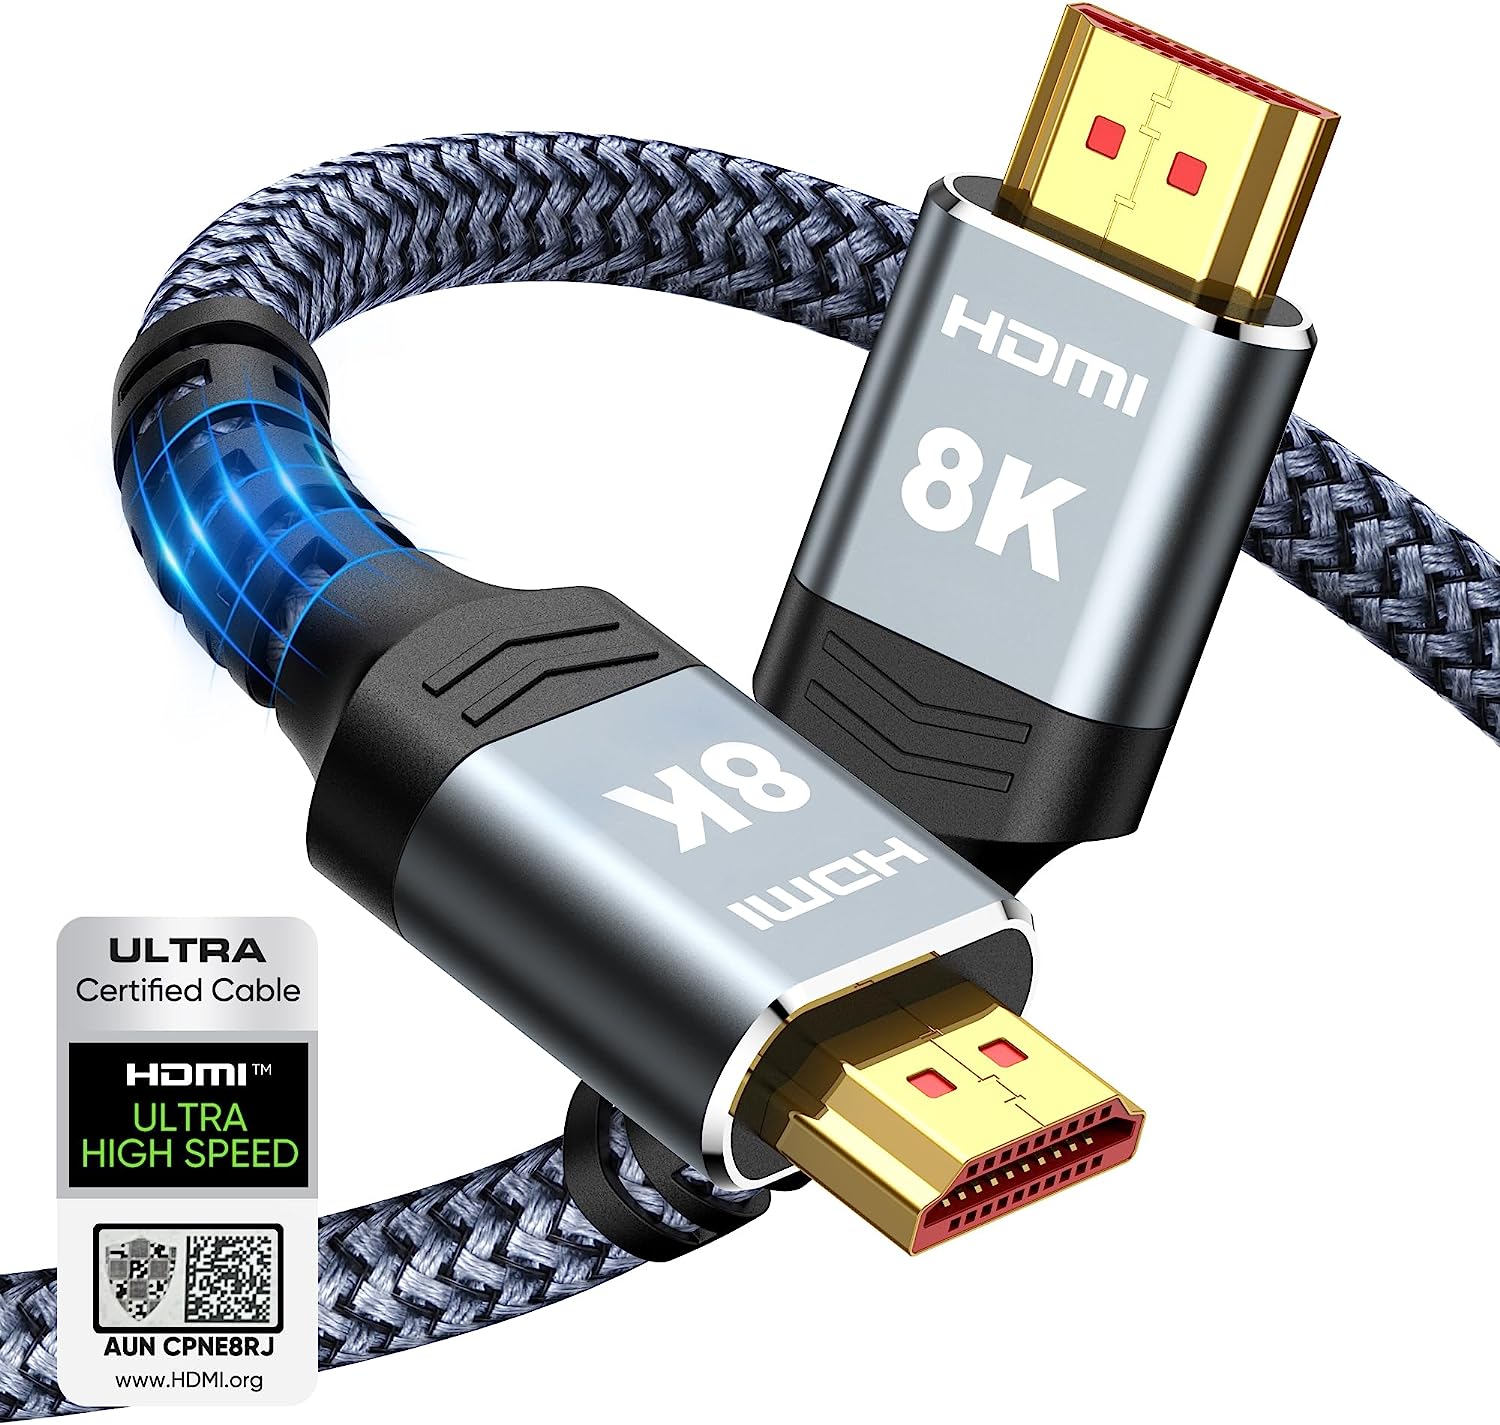 4k hdmi cable review